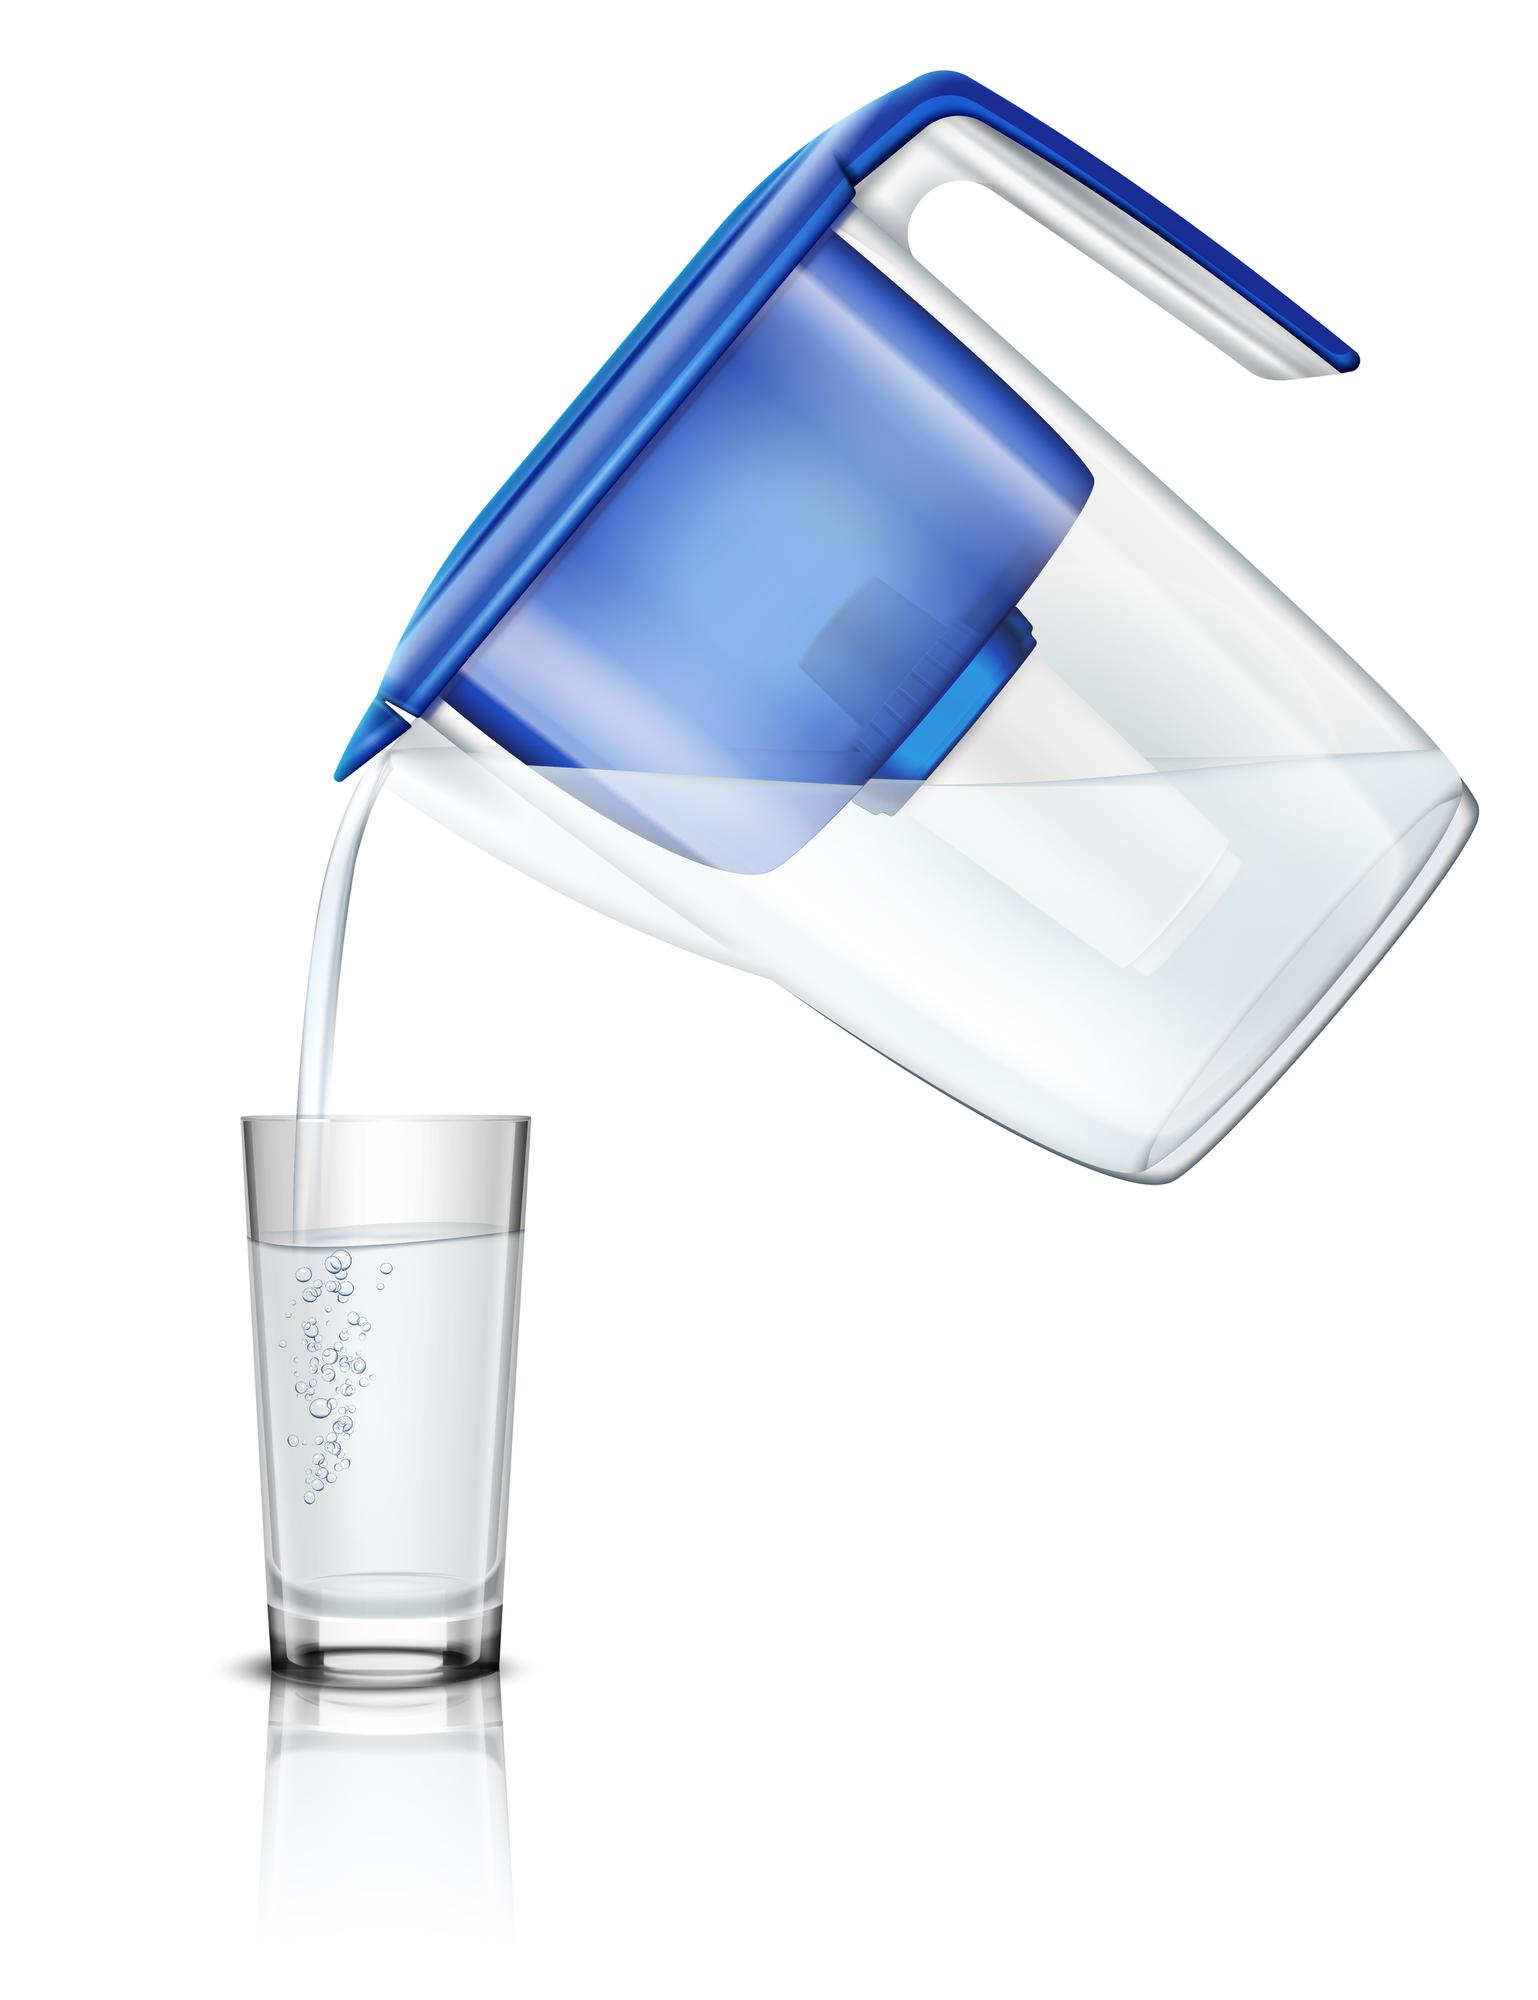 Why Choose Water Filter Jugs For Drinking Water?